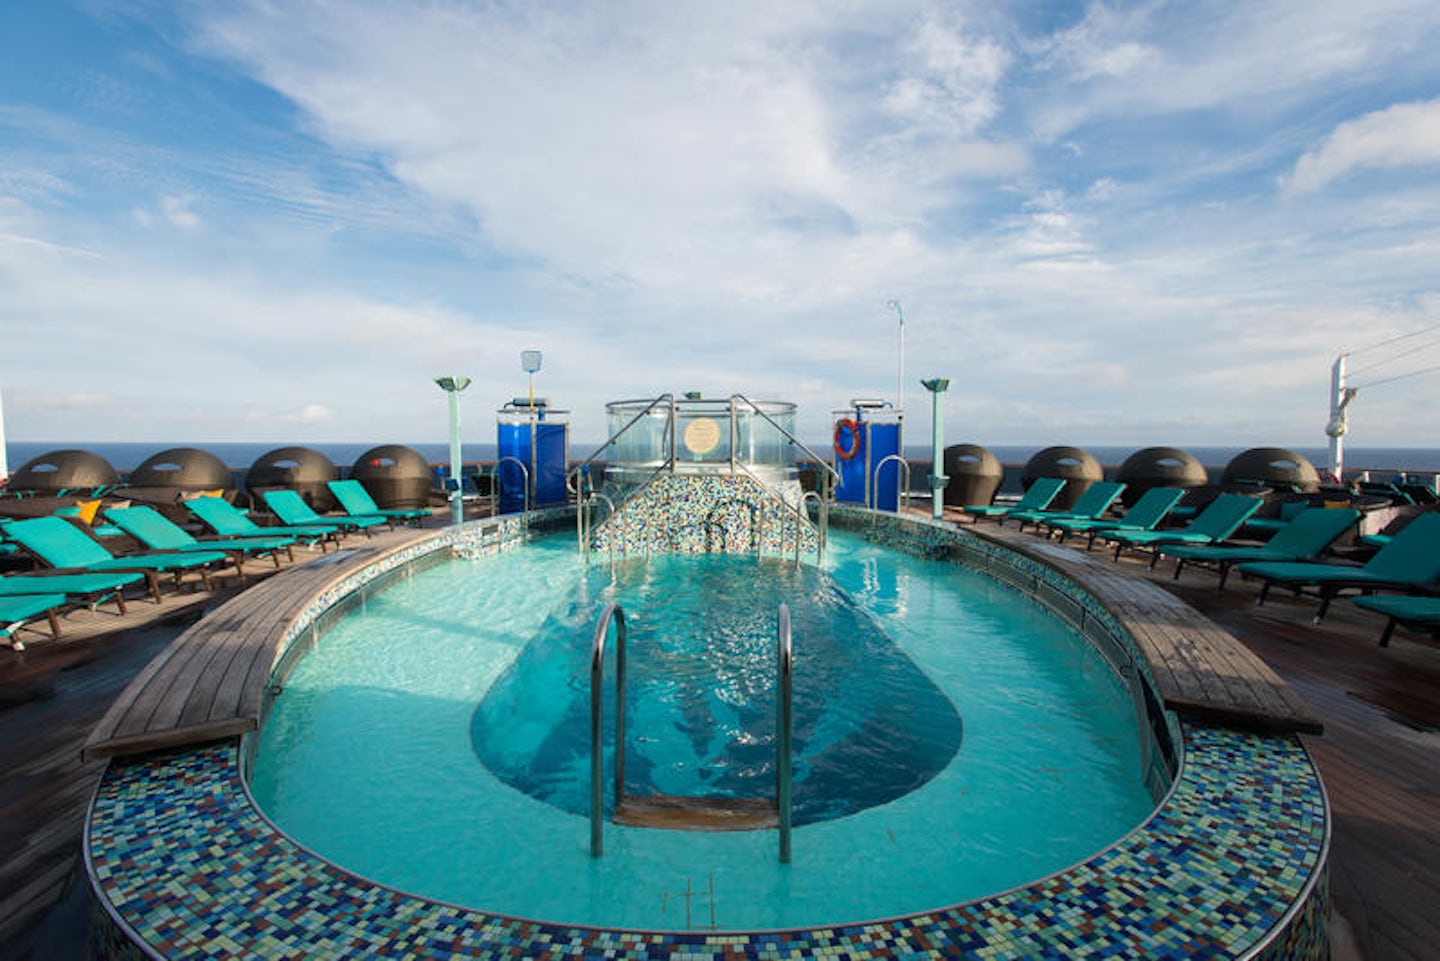 The Serenity Hot Tubs on Carnival Pride